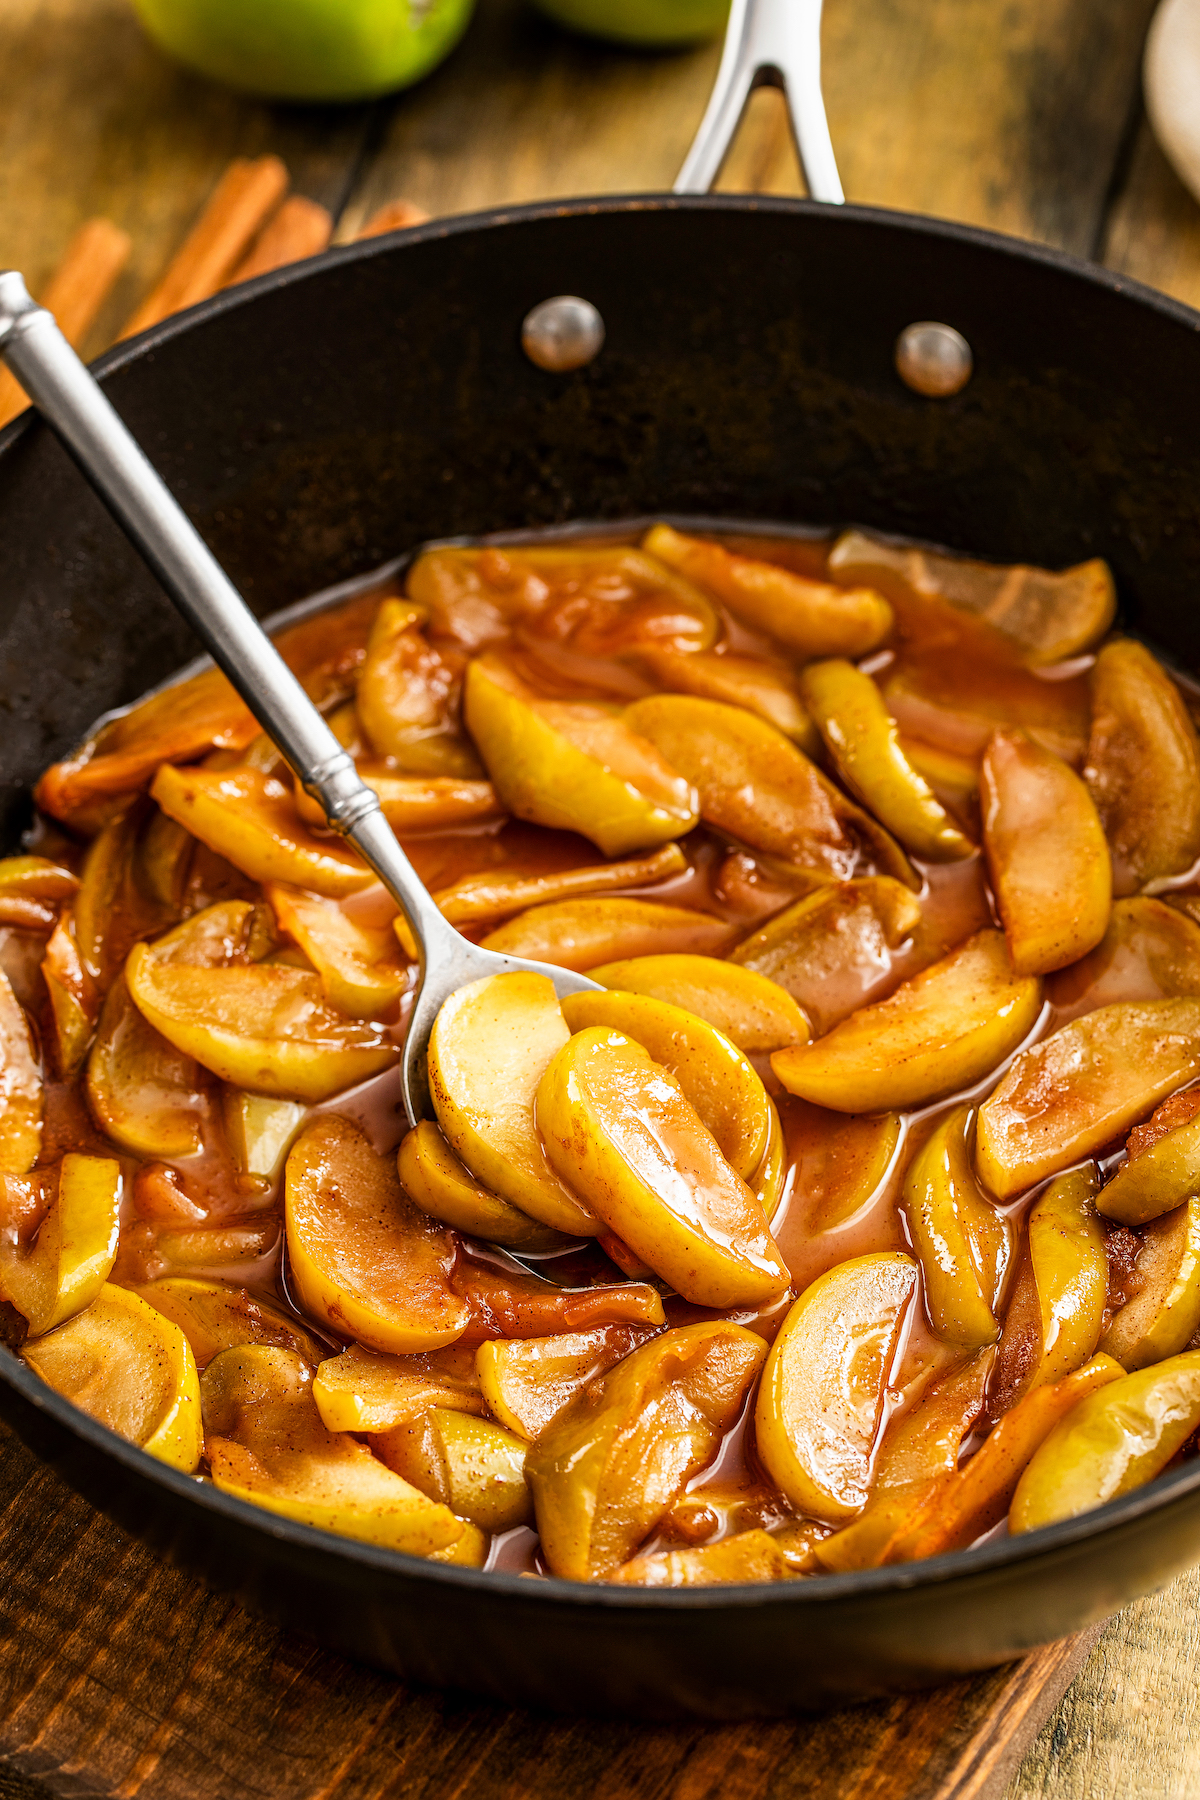 Showing how to make fried apples in a skillet with a spoon stirring the apples.